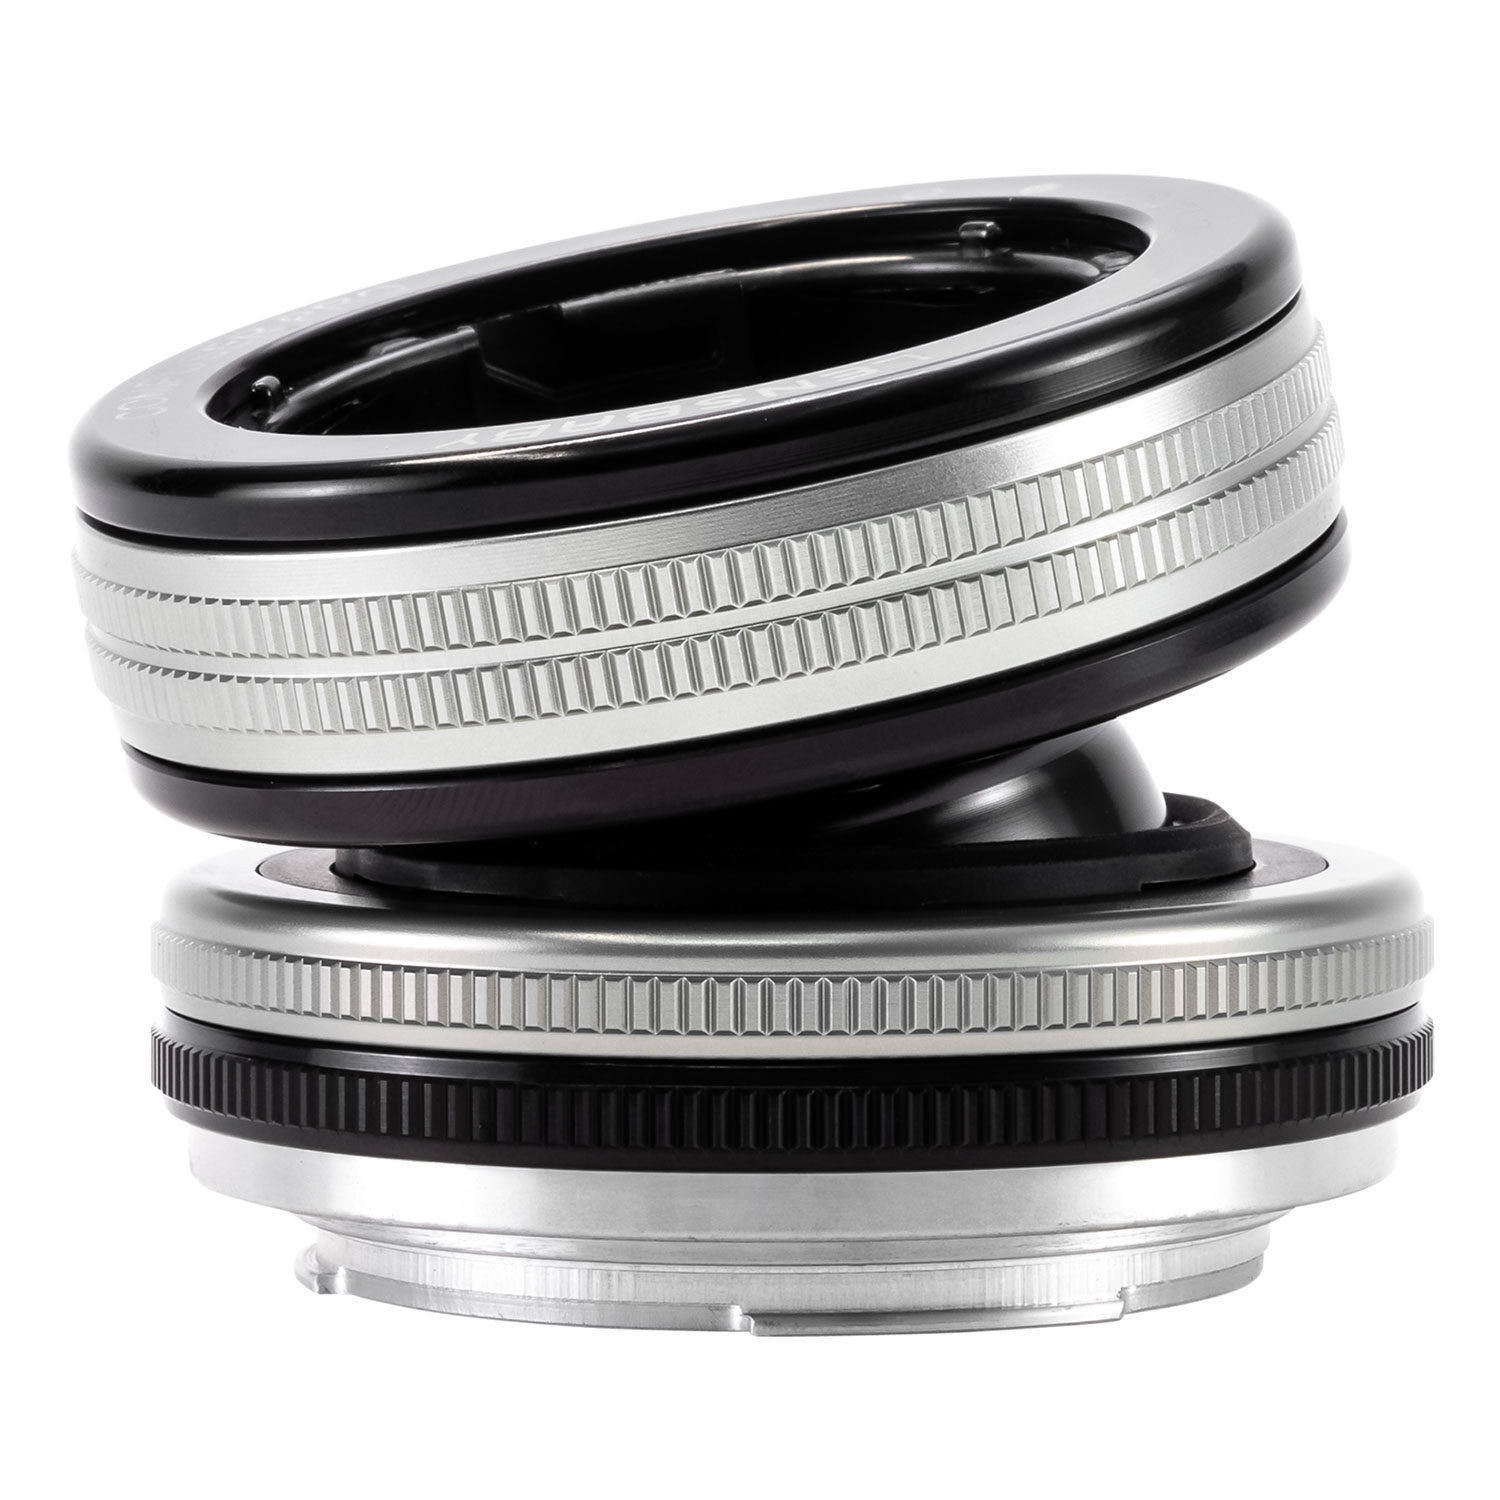 Lensbaby Composer Pro II Body Only Sony E-mount objectief